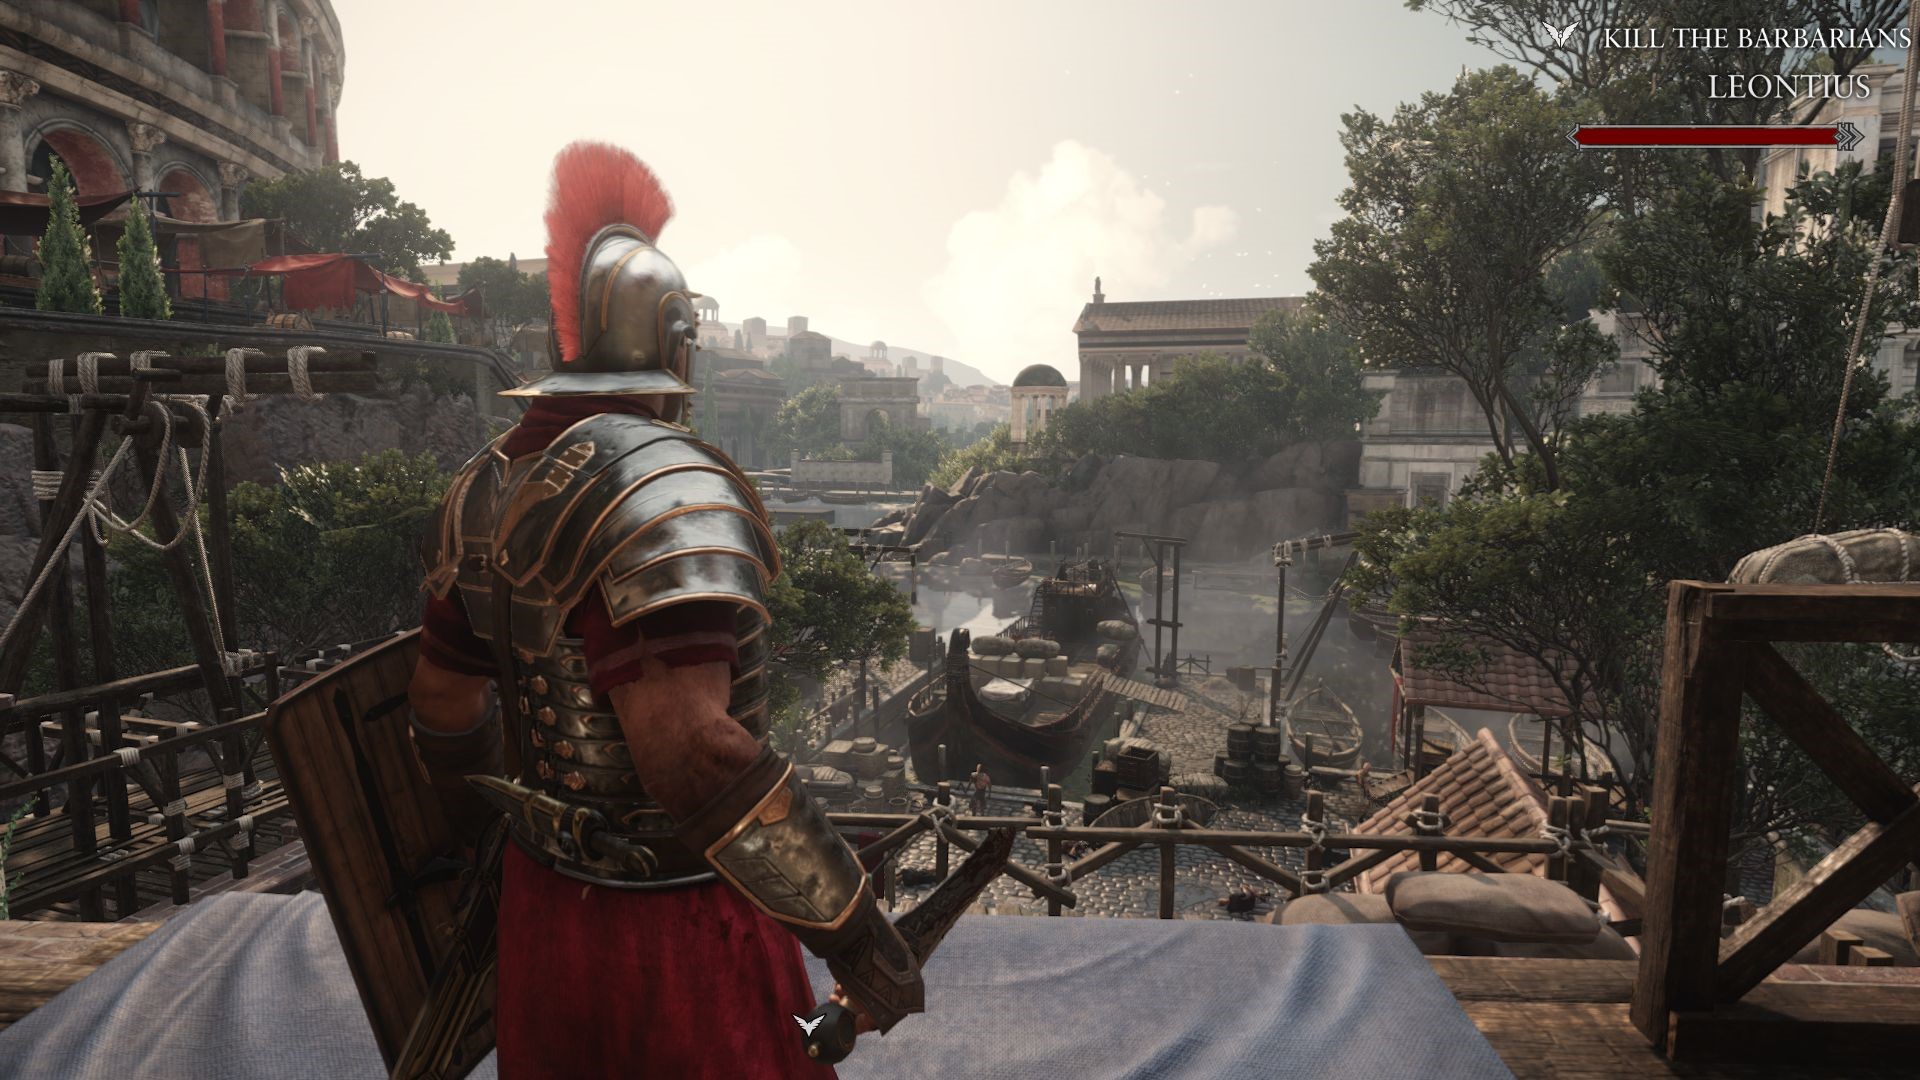 Beautifully crafted environments and incredible armor detailing are just two bonuses to this game.